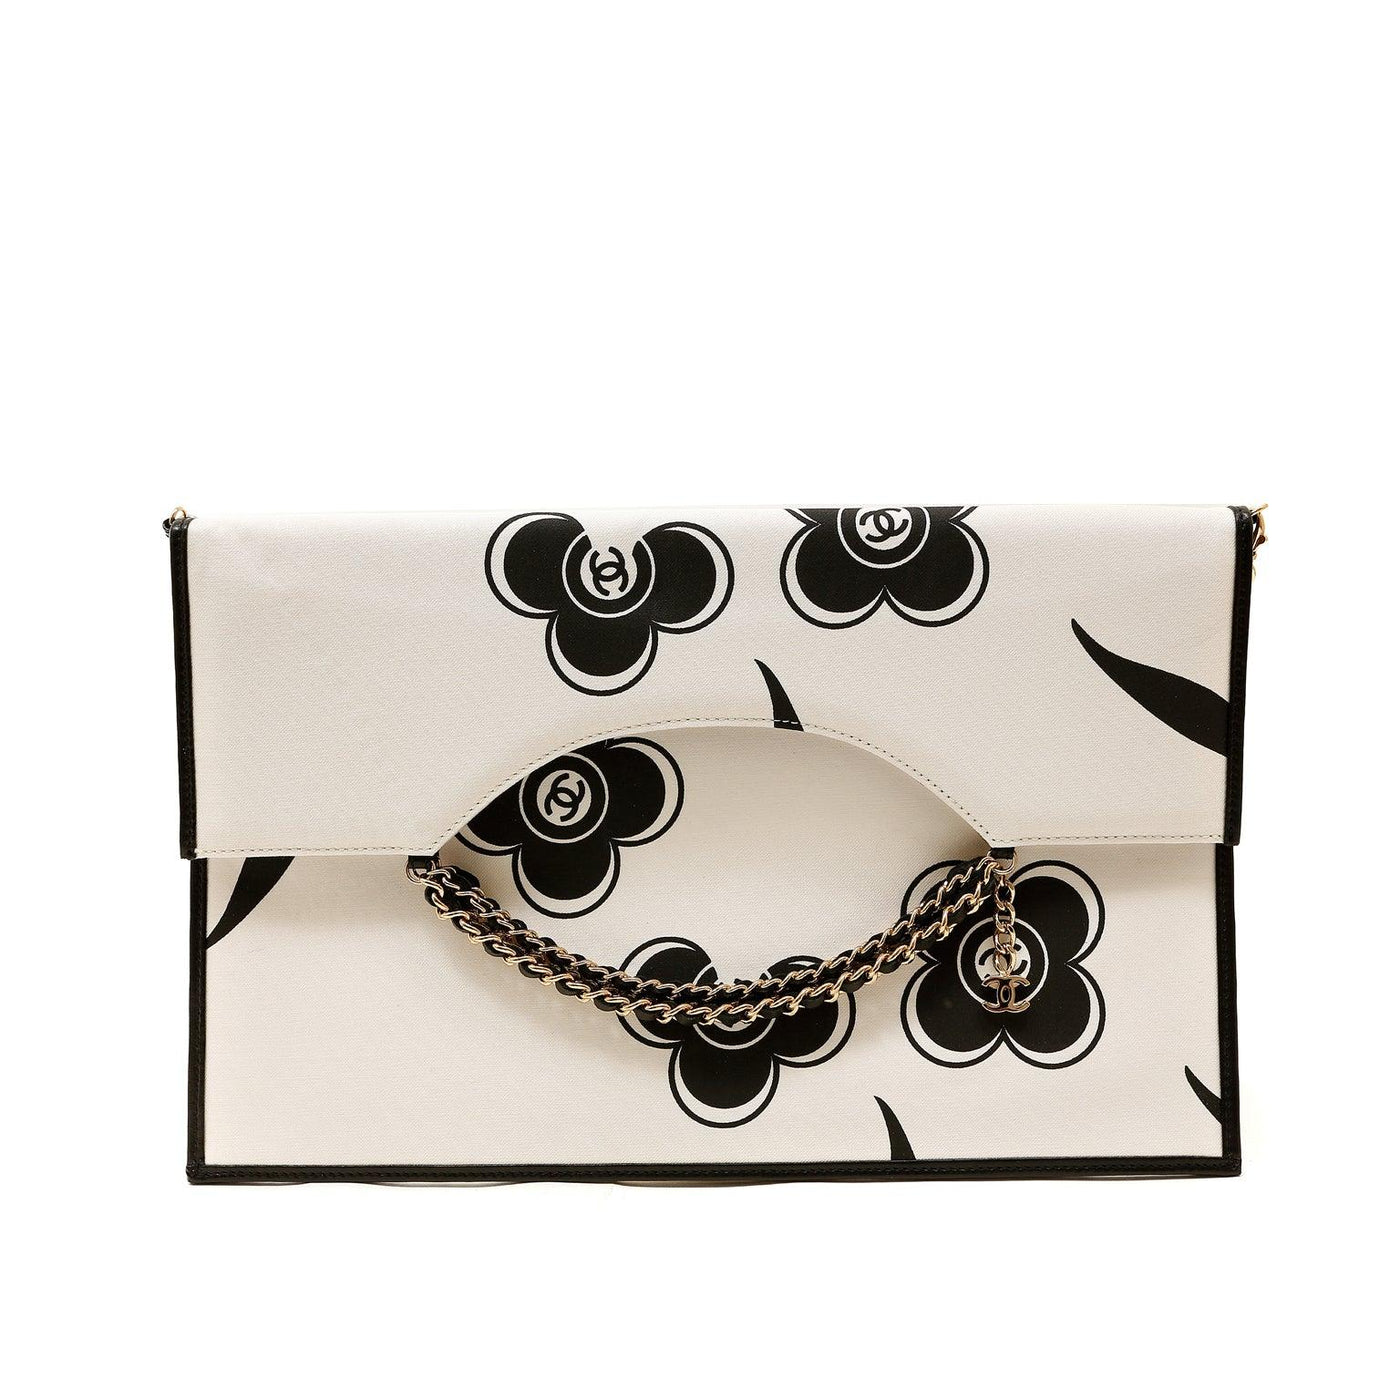 Chanel Ivory and Black Camellia Envelope Clutch with Strap - Only Authentics